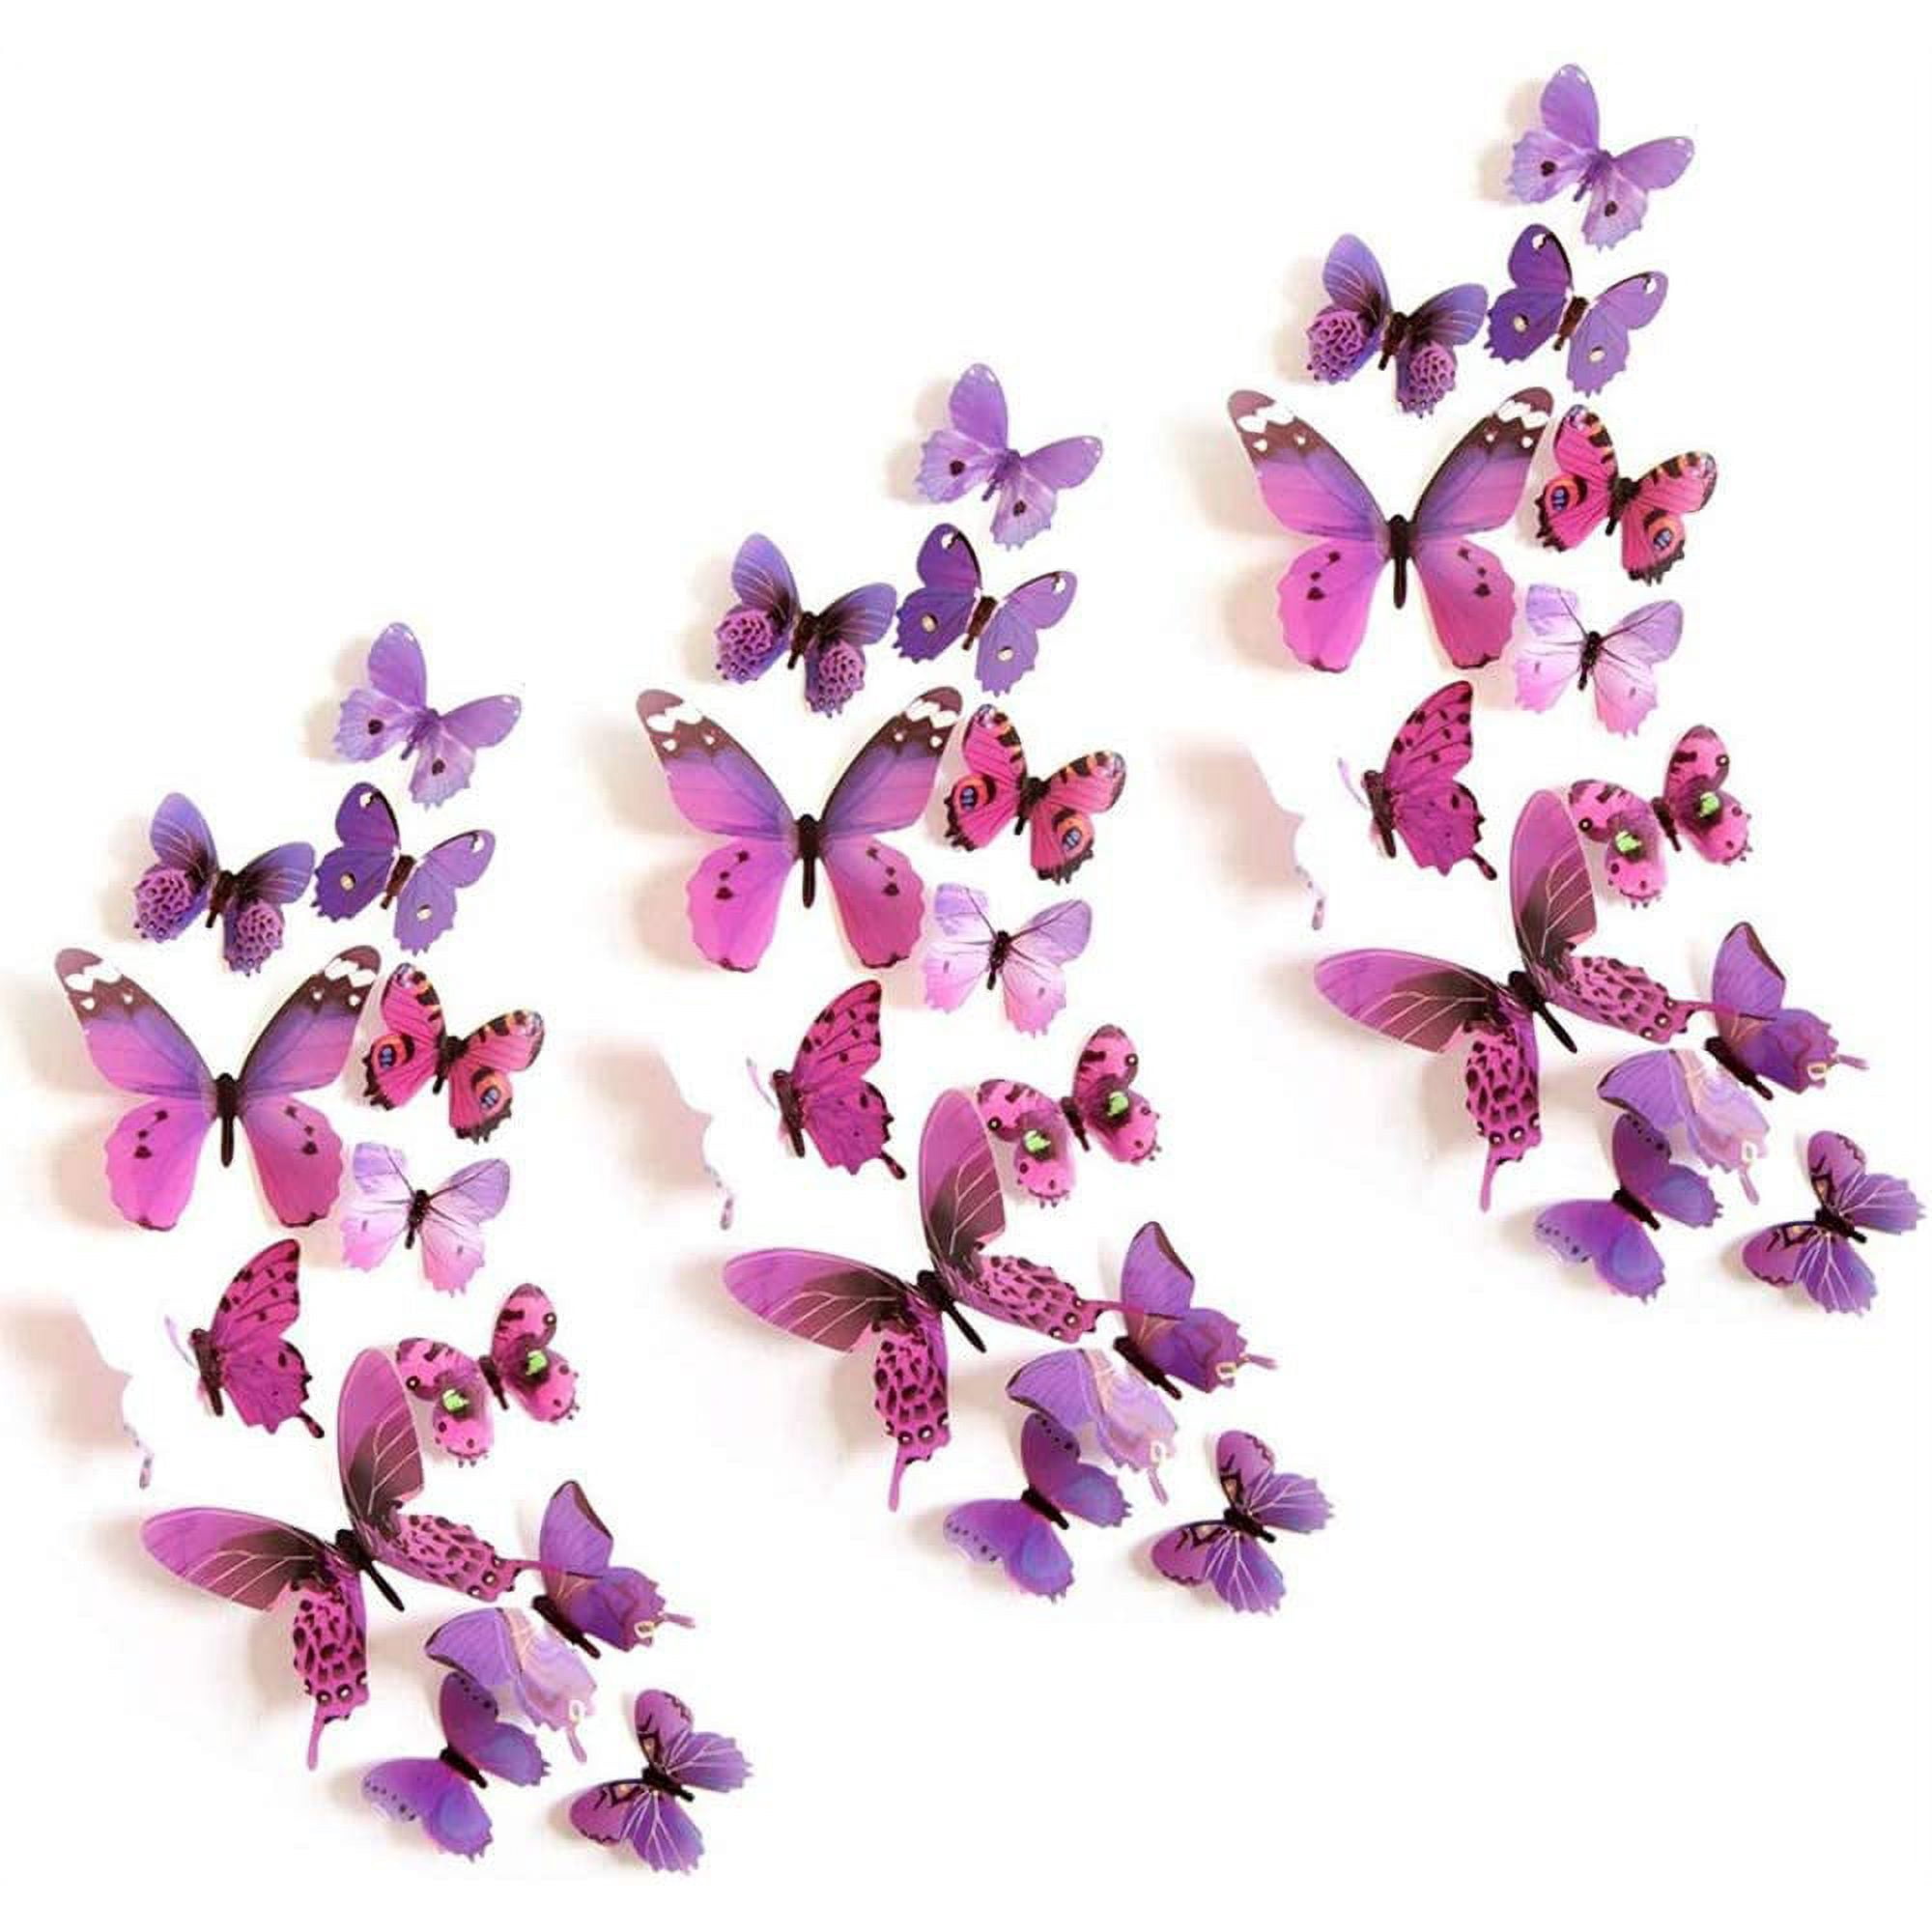 3D Butterfly Stickers, 36 Pieces Purple Butterfly Stickers ...